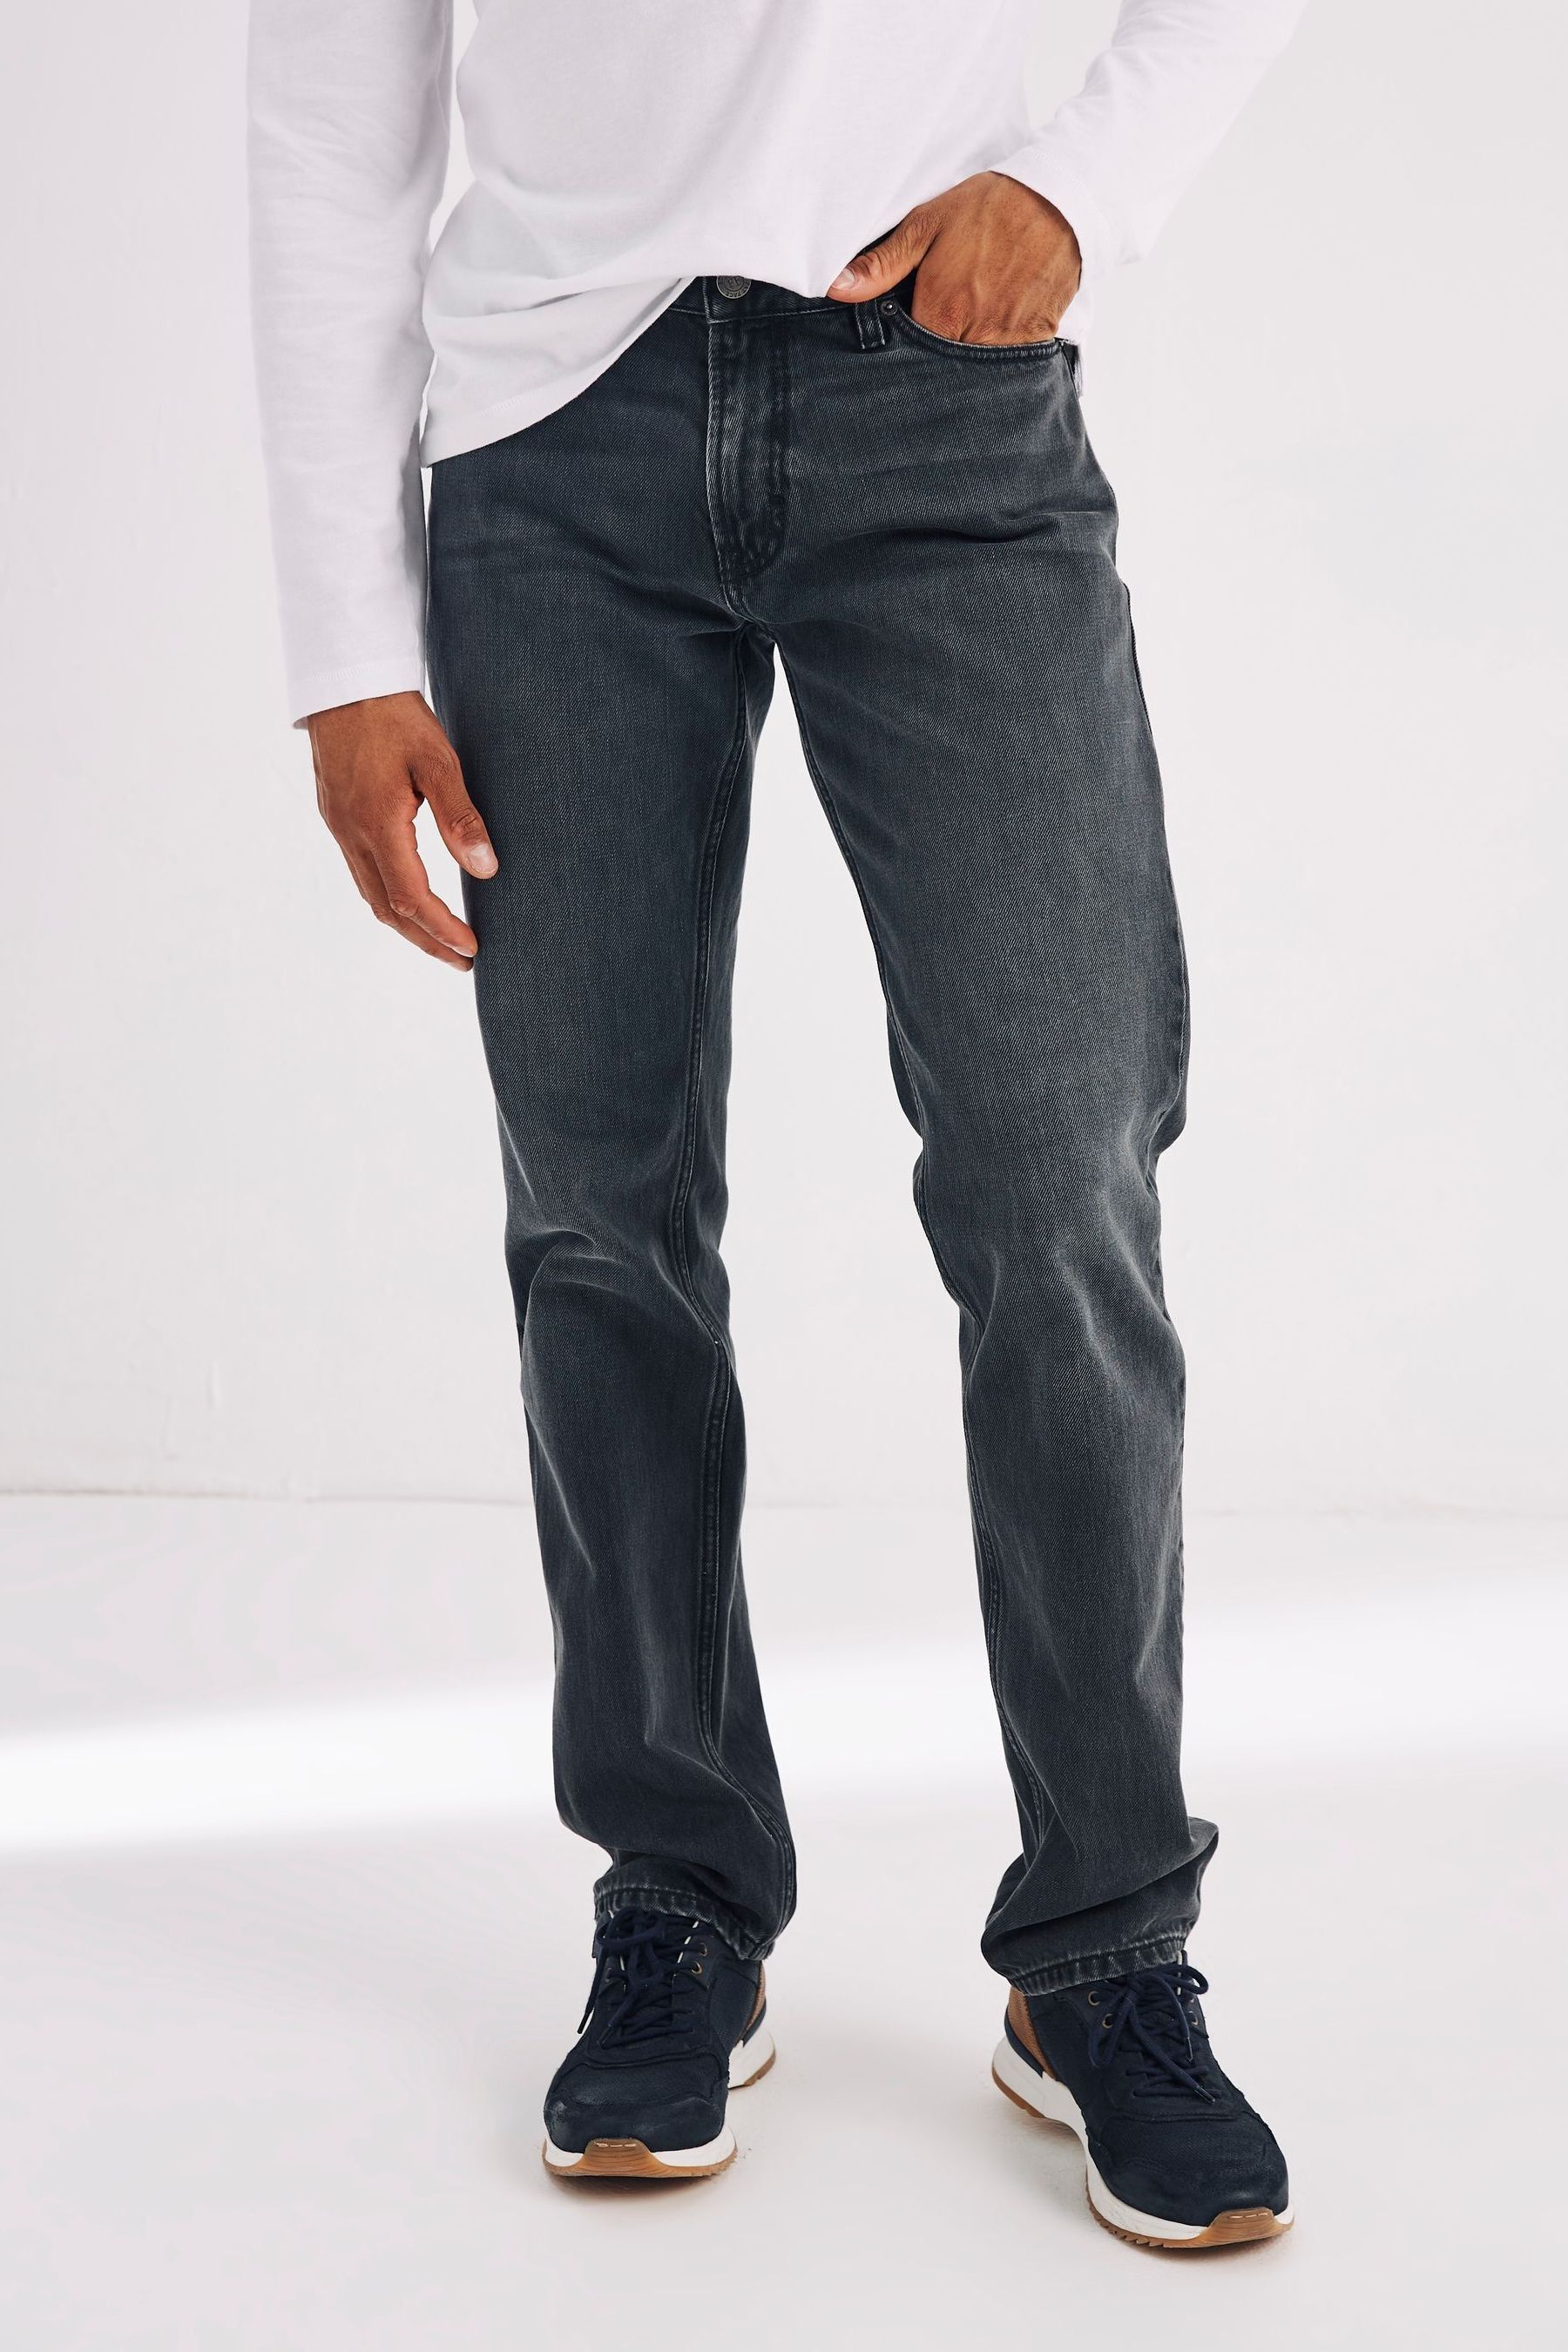 Buy FatFace Grey Straight Jeans from the Next UK online shop